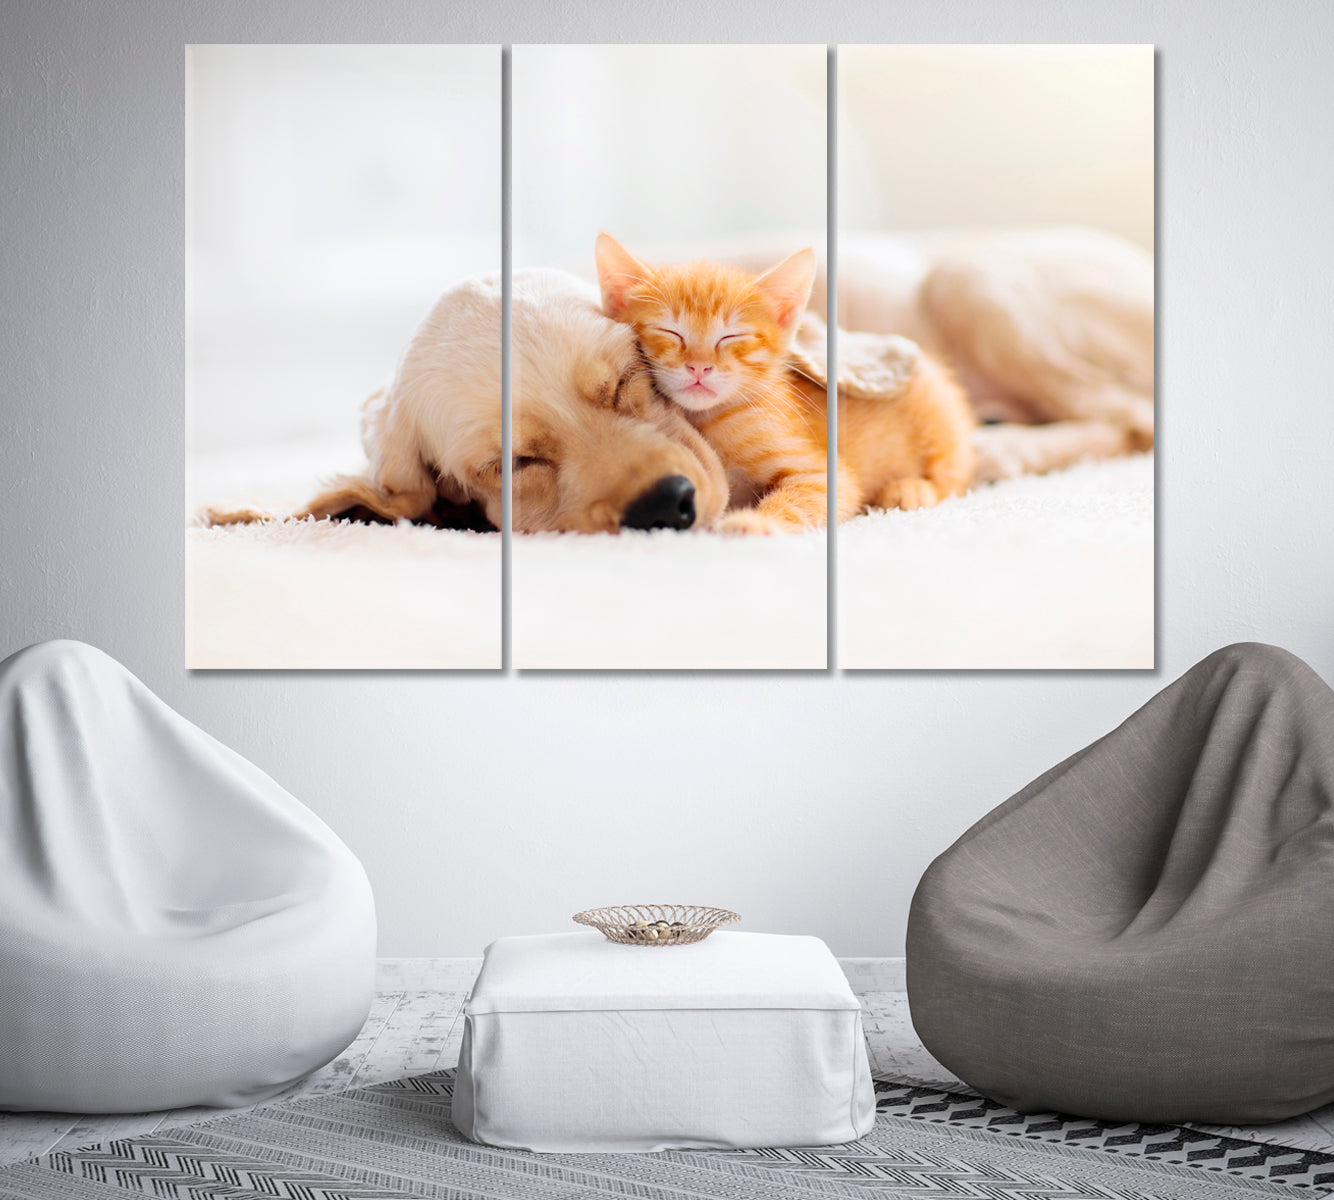 Cat and Puppy Sleeping Together Canvas Print-Canvas Print-CetArt-1 Panel-24x16 inches-CetArt